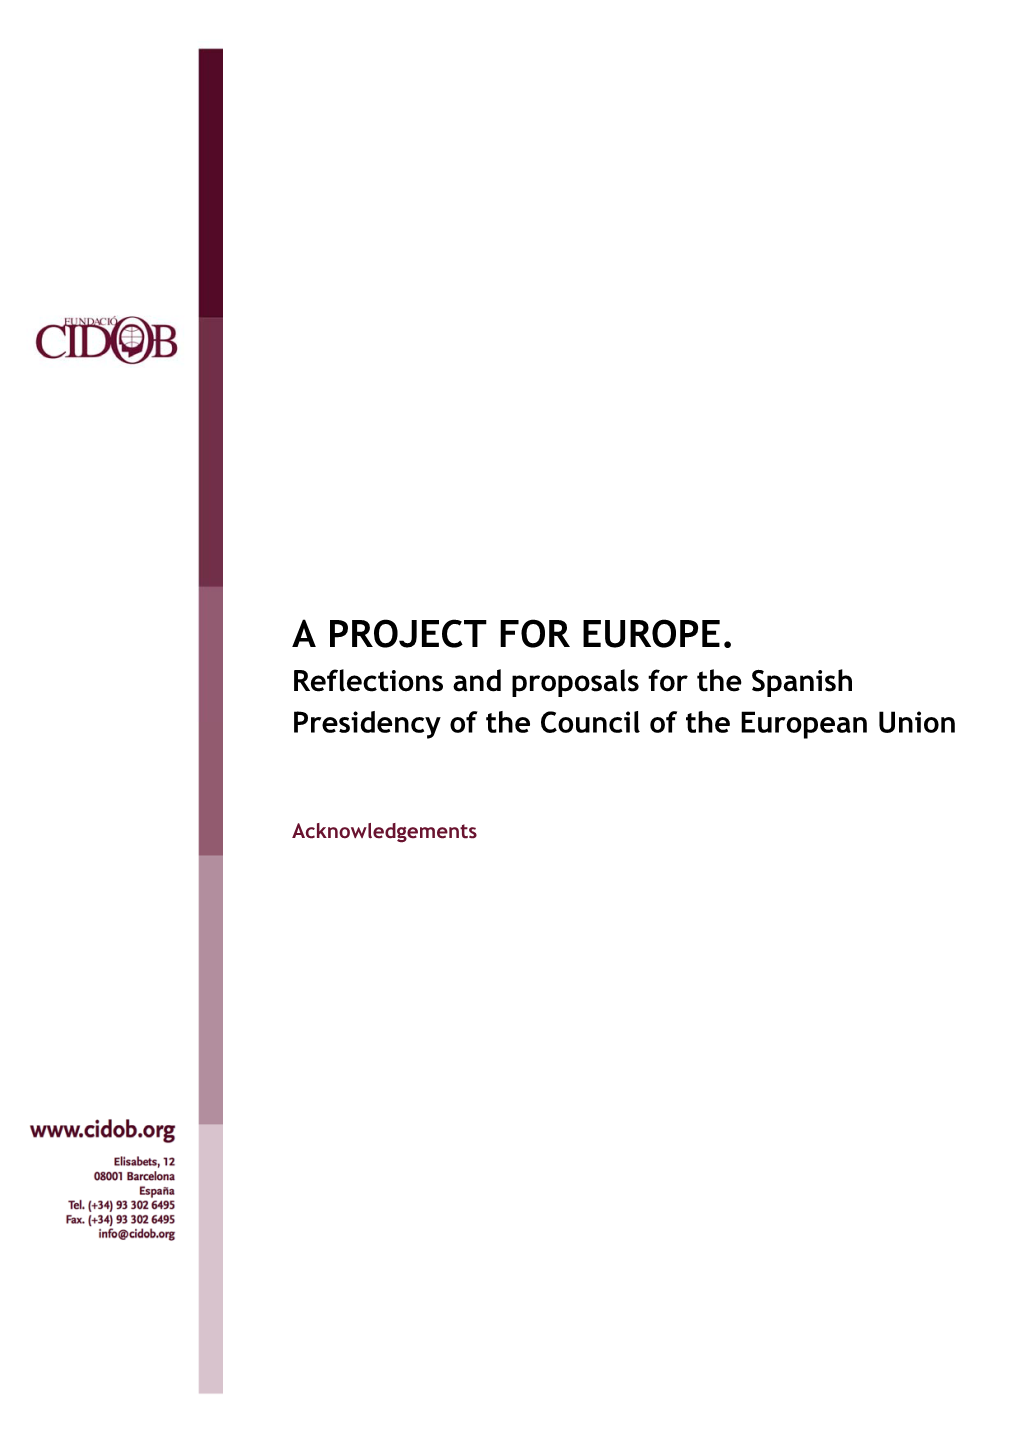 A PROJECT for EUROPE. Reflections and Proposals for the Spanish Presidency of the Council of the European Union